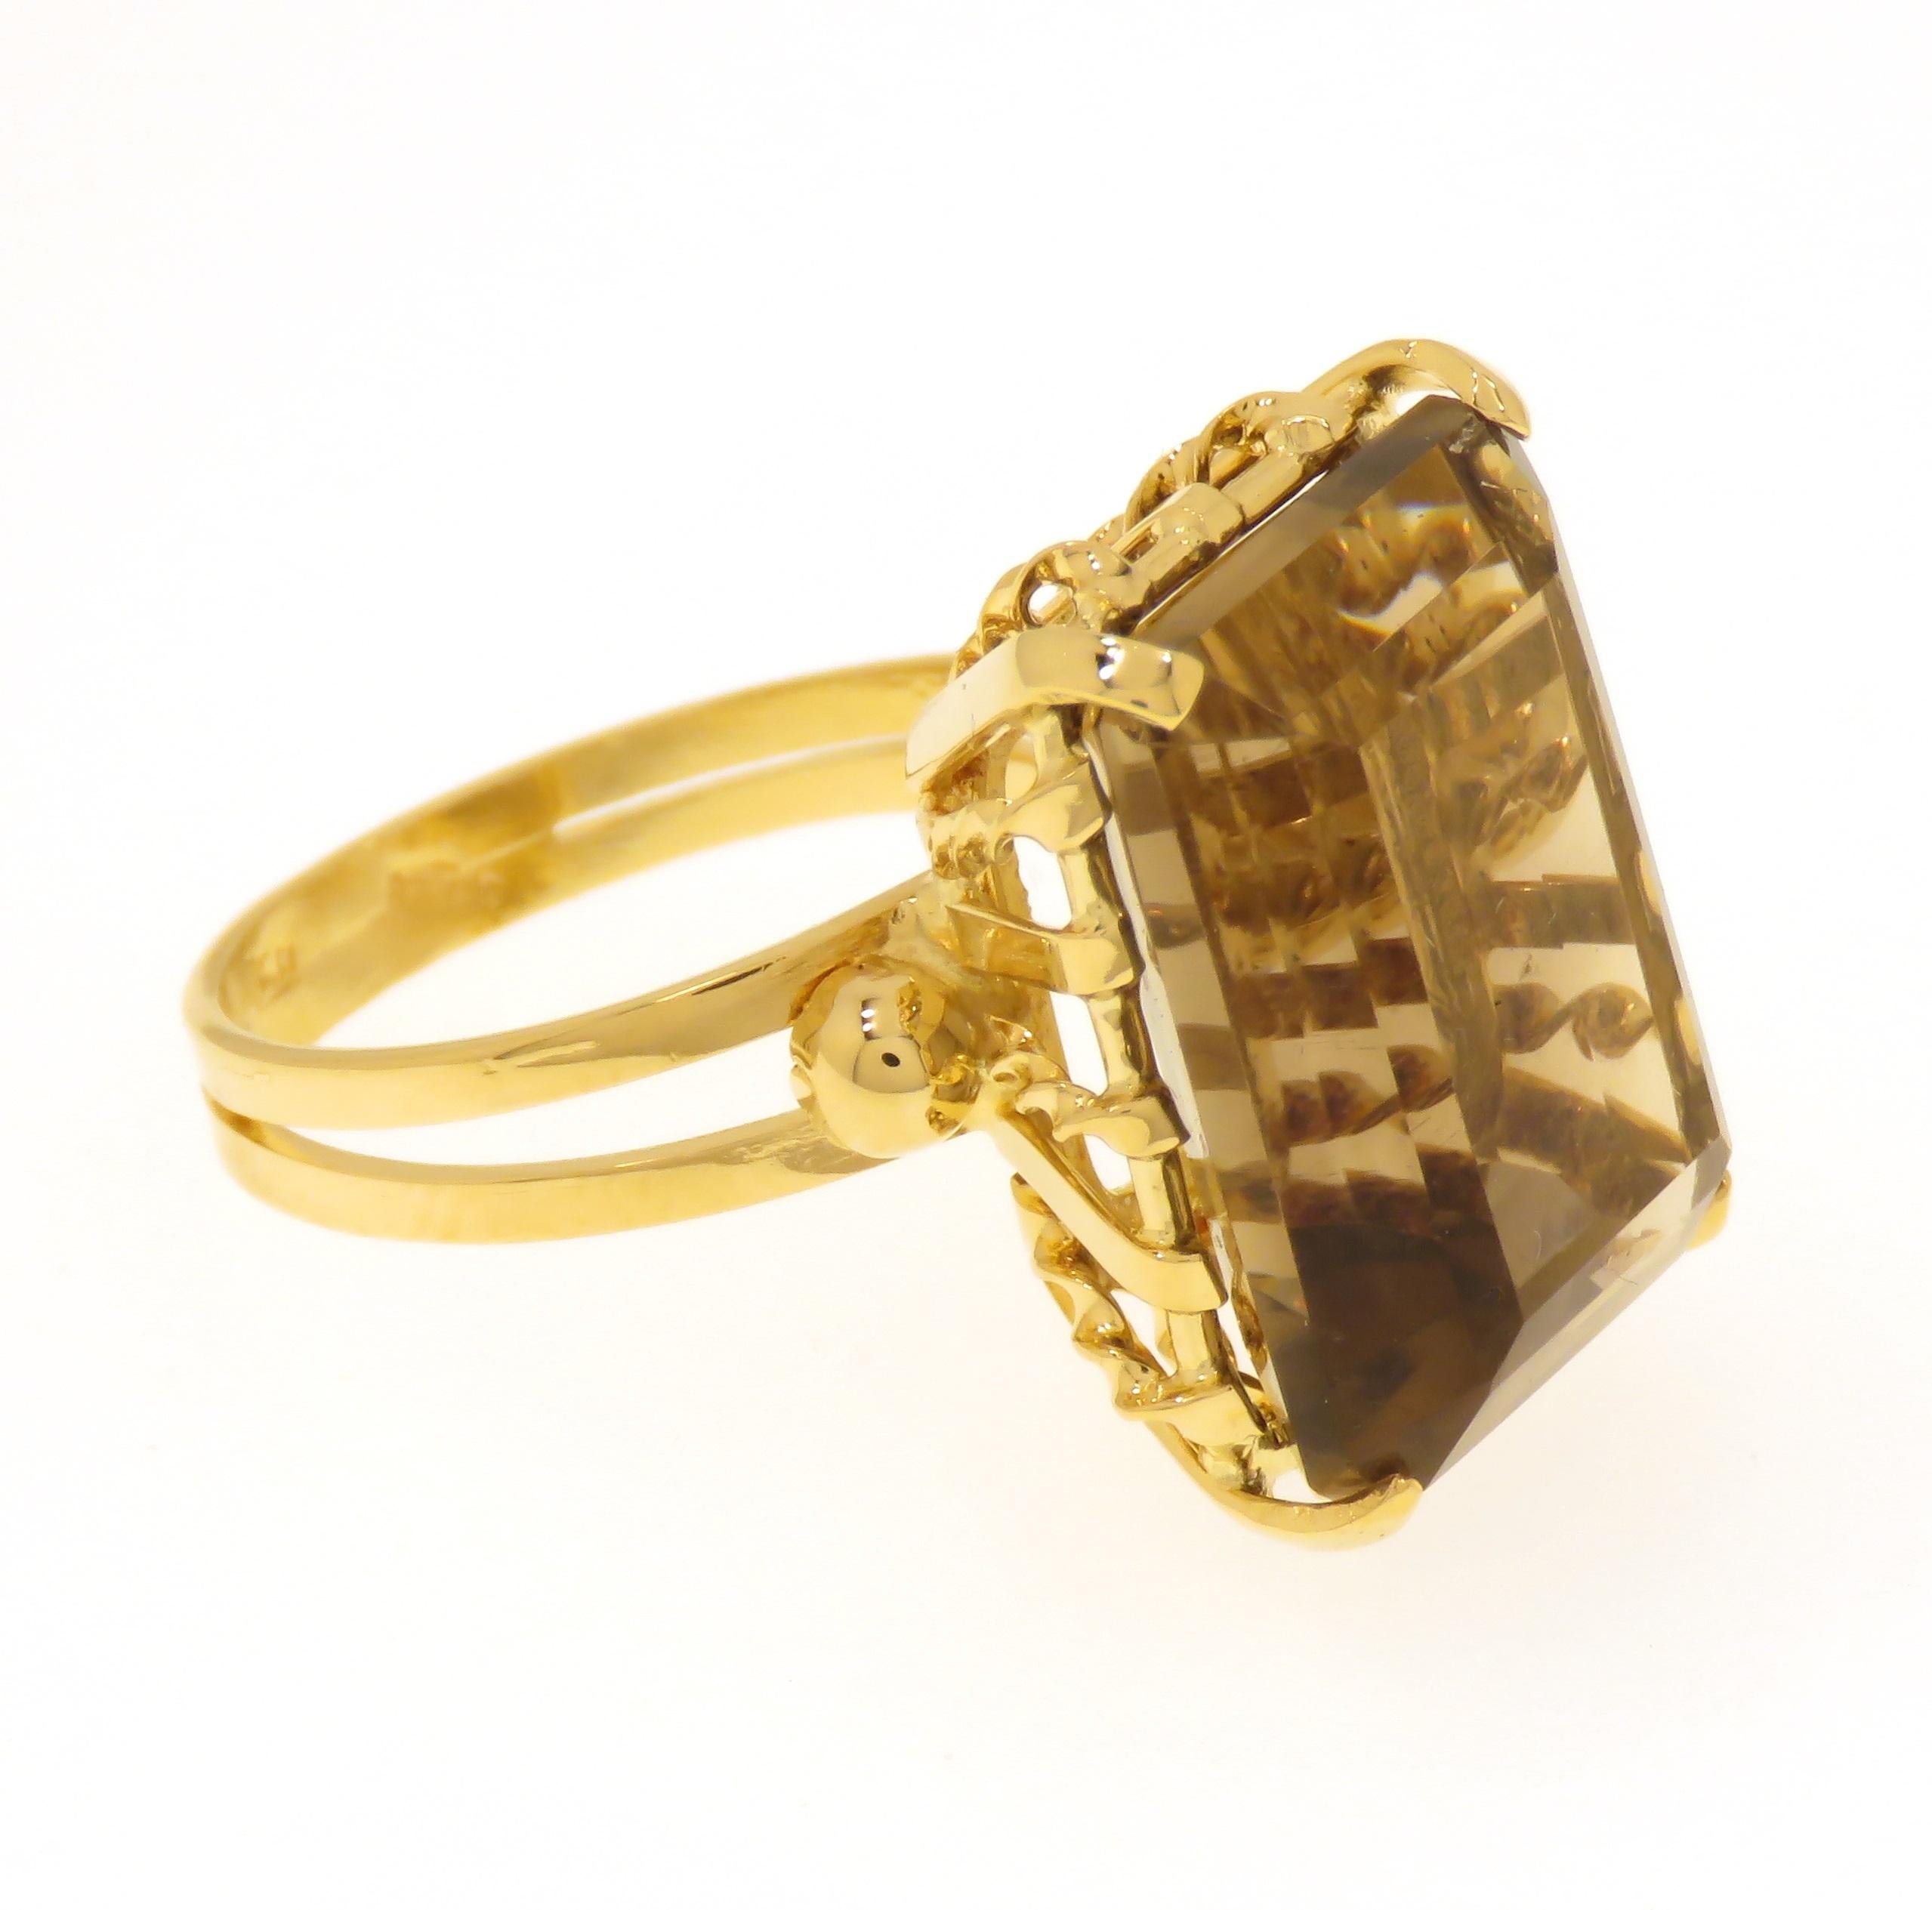 Brown Topaz 18 Karat Yellow Gold Vintage Cocktail Ring Handcrafted in Italy 1